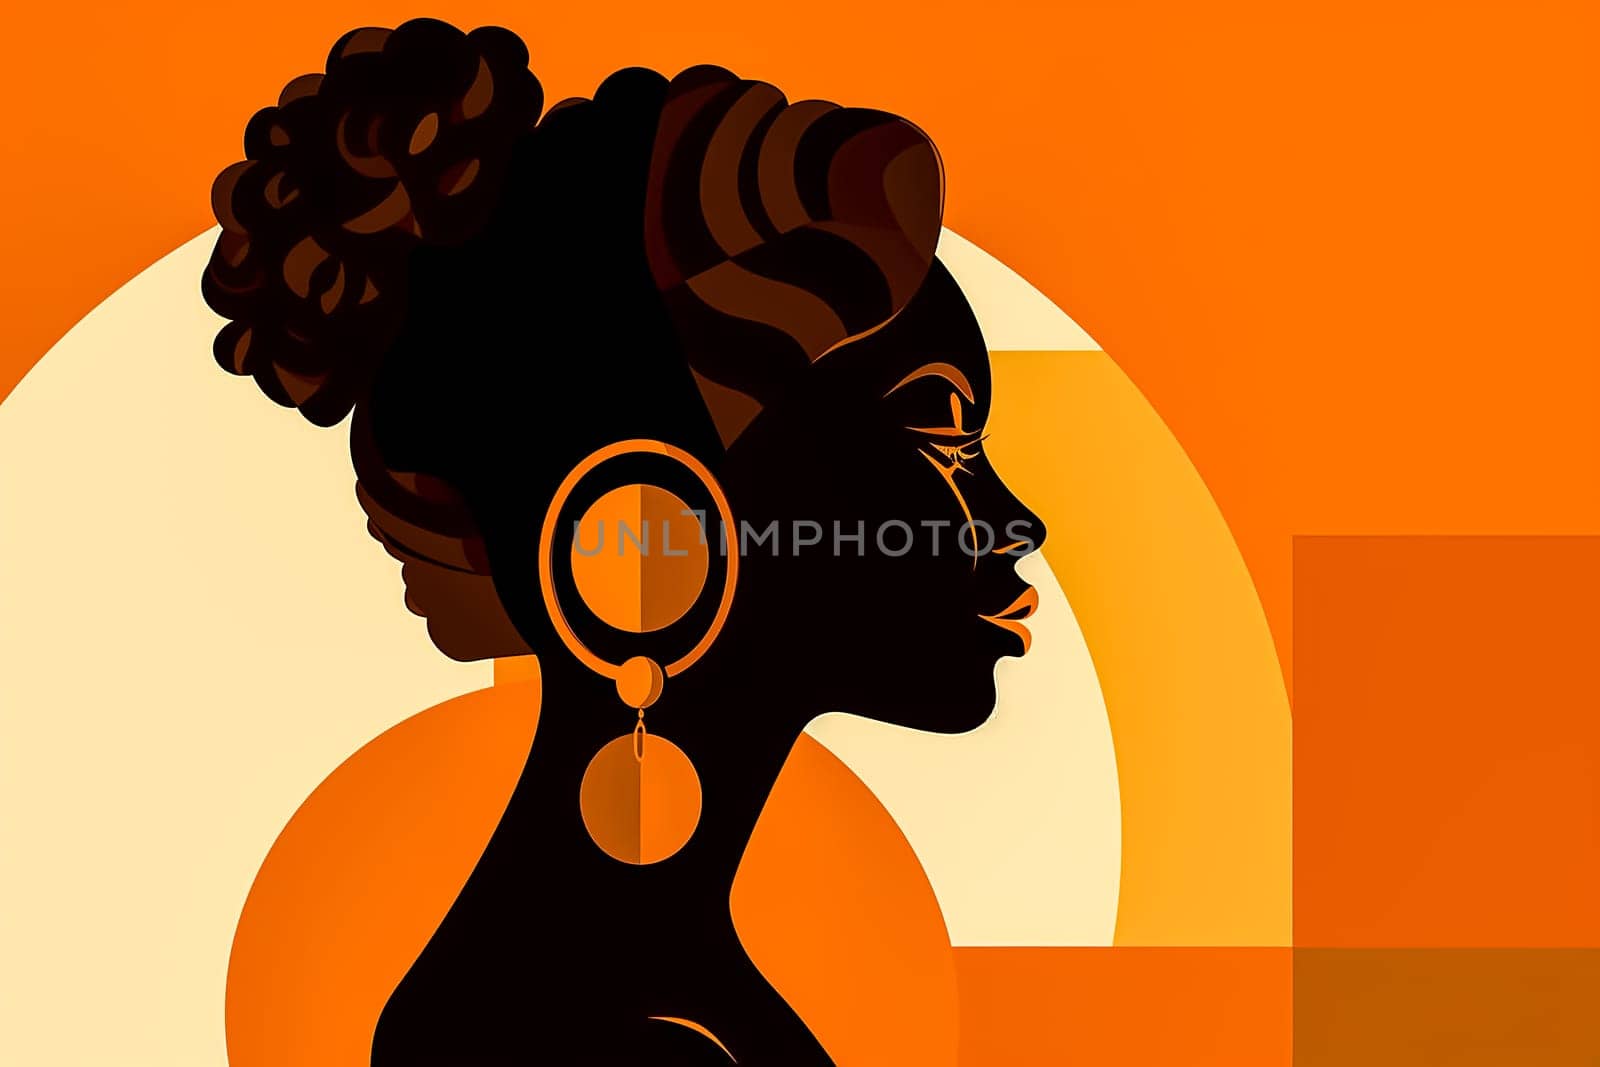 Celebrate National Black History Month with a vibrant template by Alla_Morozova93